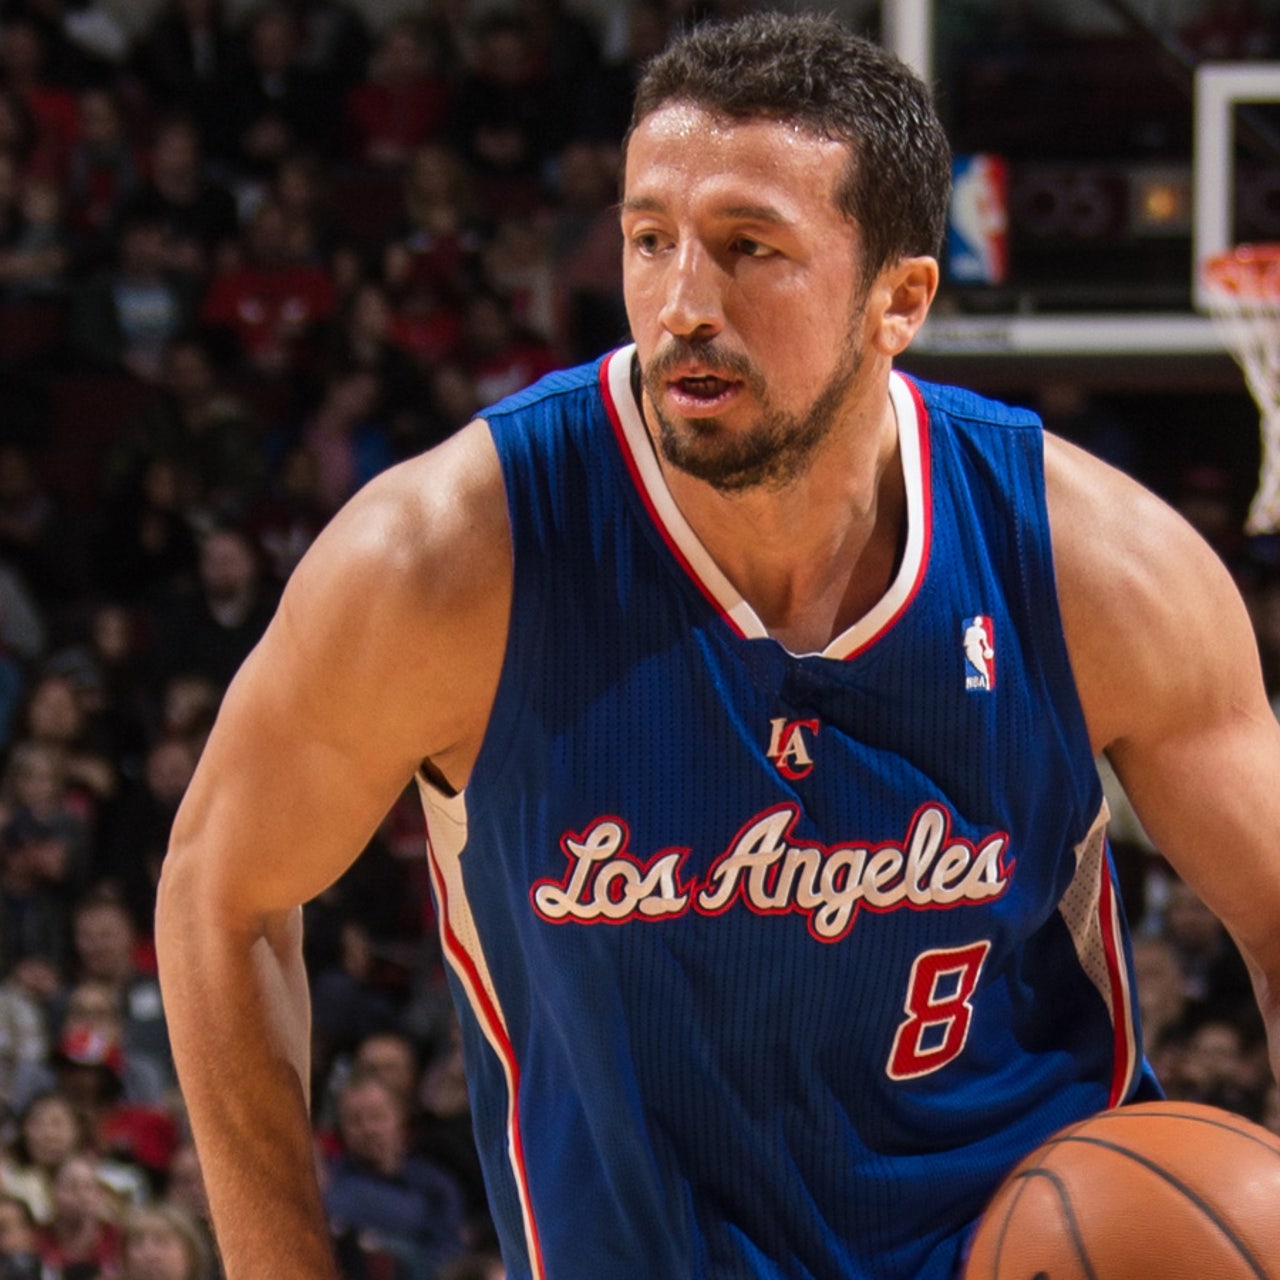 Magic's Hedo Turkoglu suspended 20 games for taking banned